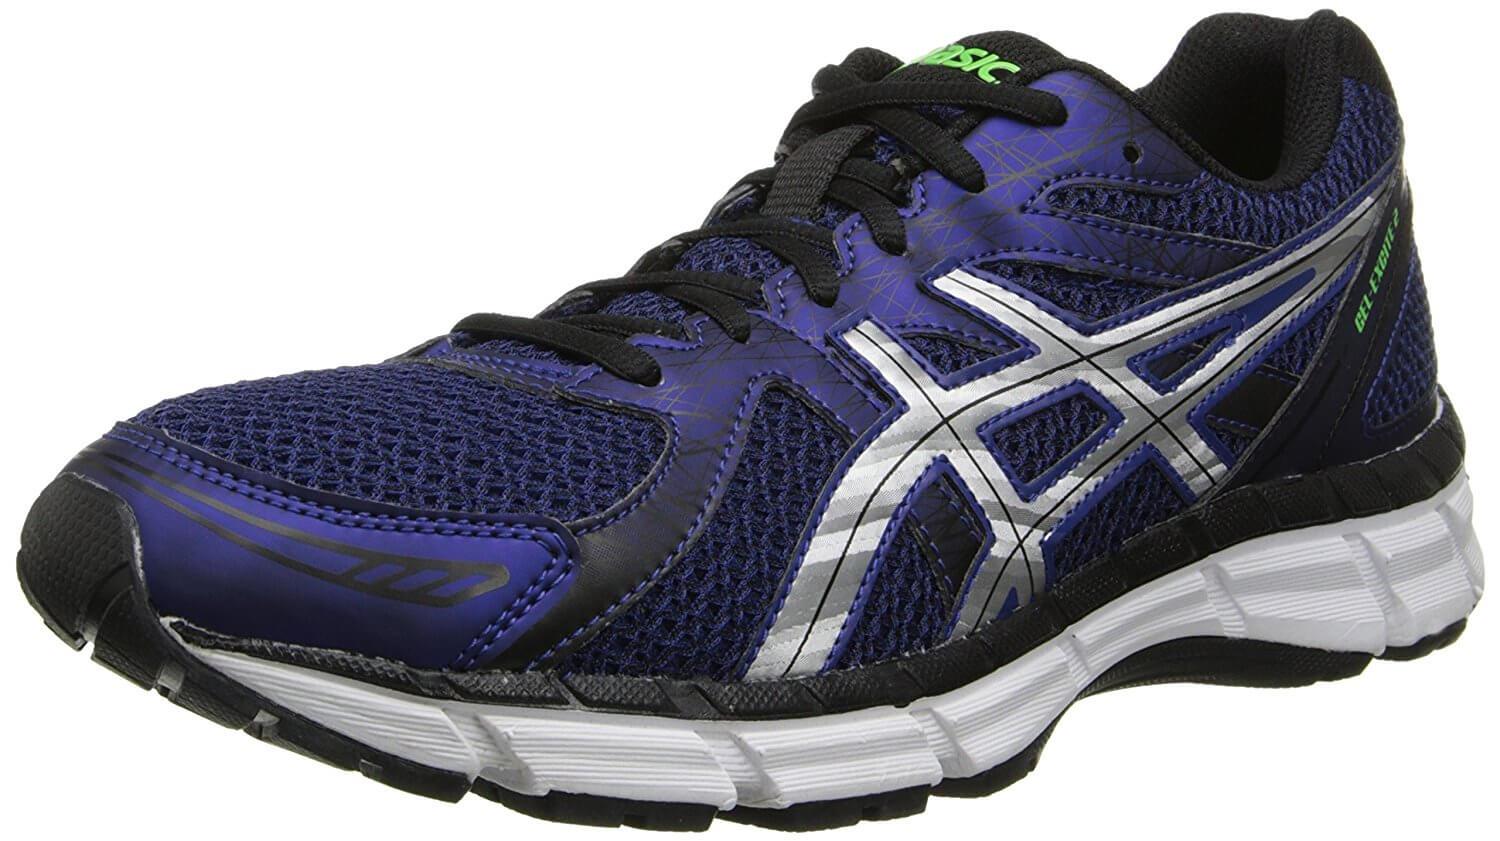 ASICS Gel Excite 2 Review - To buy or 